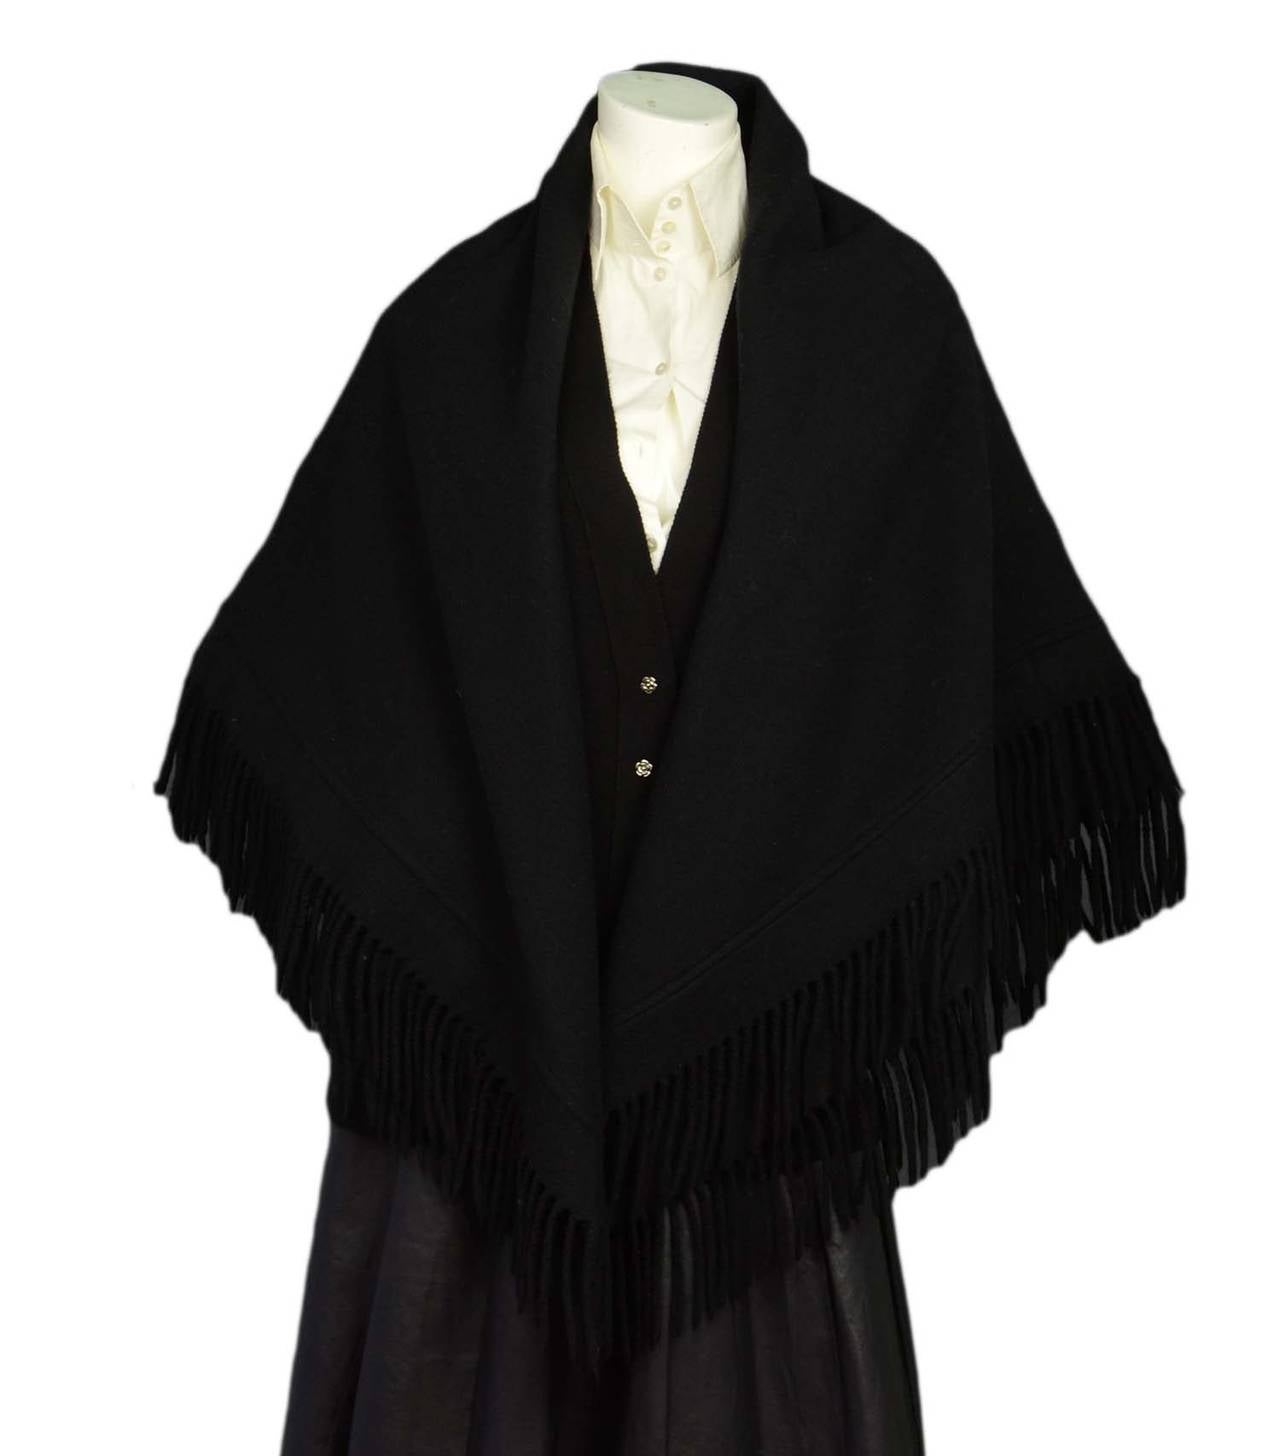 Hermes Black Cashmere Shawl/Throw w/FringeFeatures embroidered 